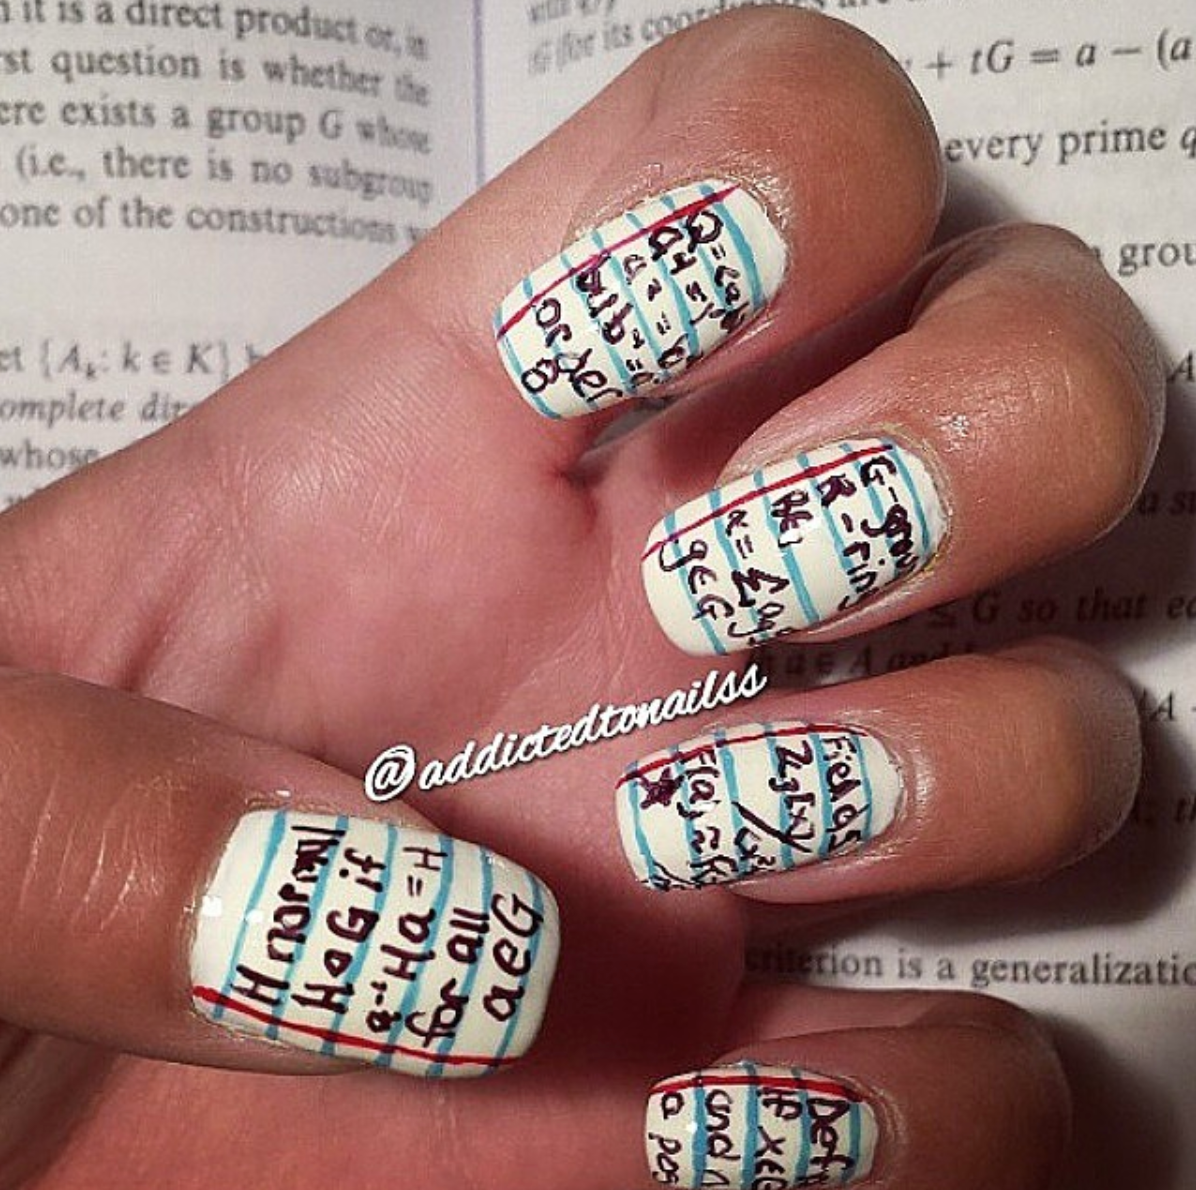 These Fun Nails Bring Creativity To Back-To-School Beauty